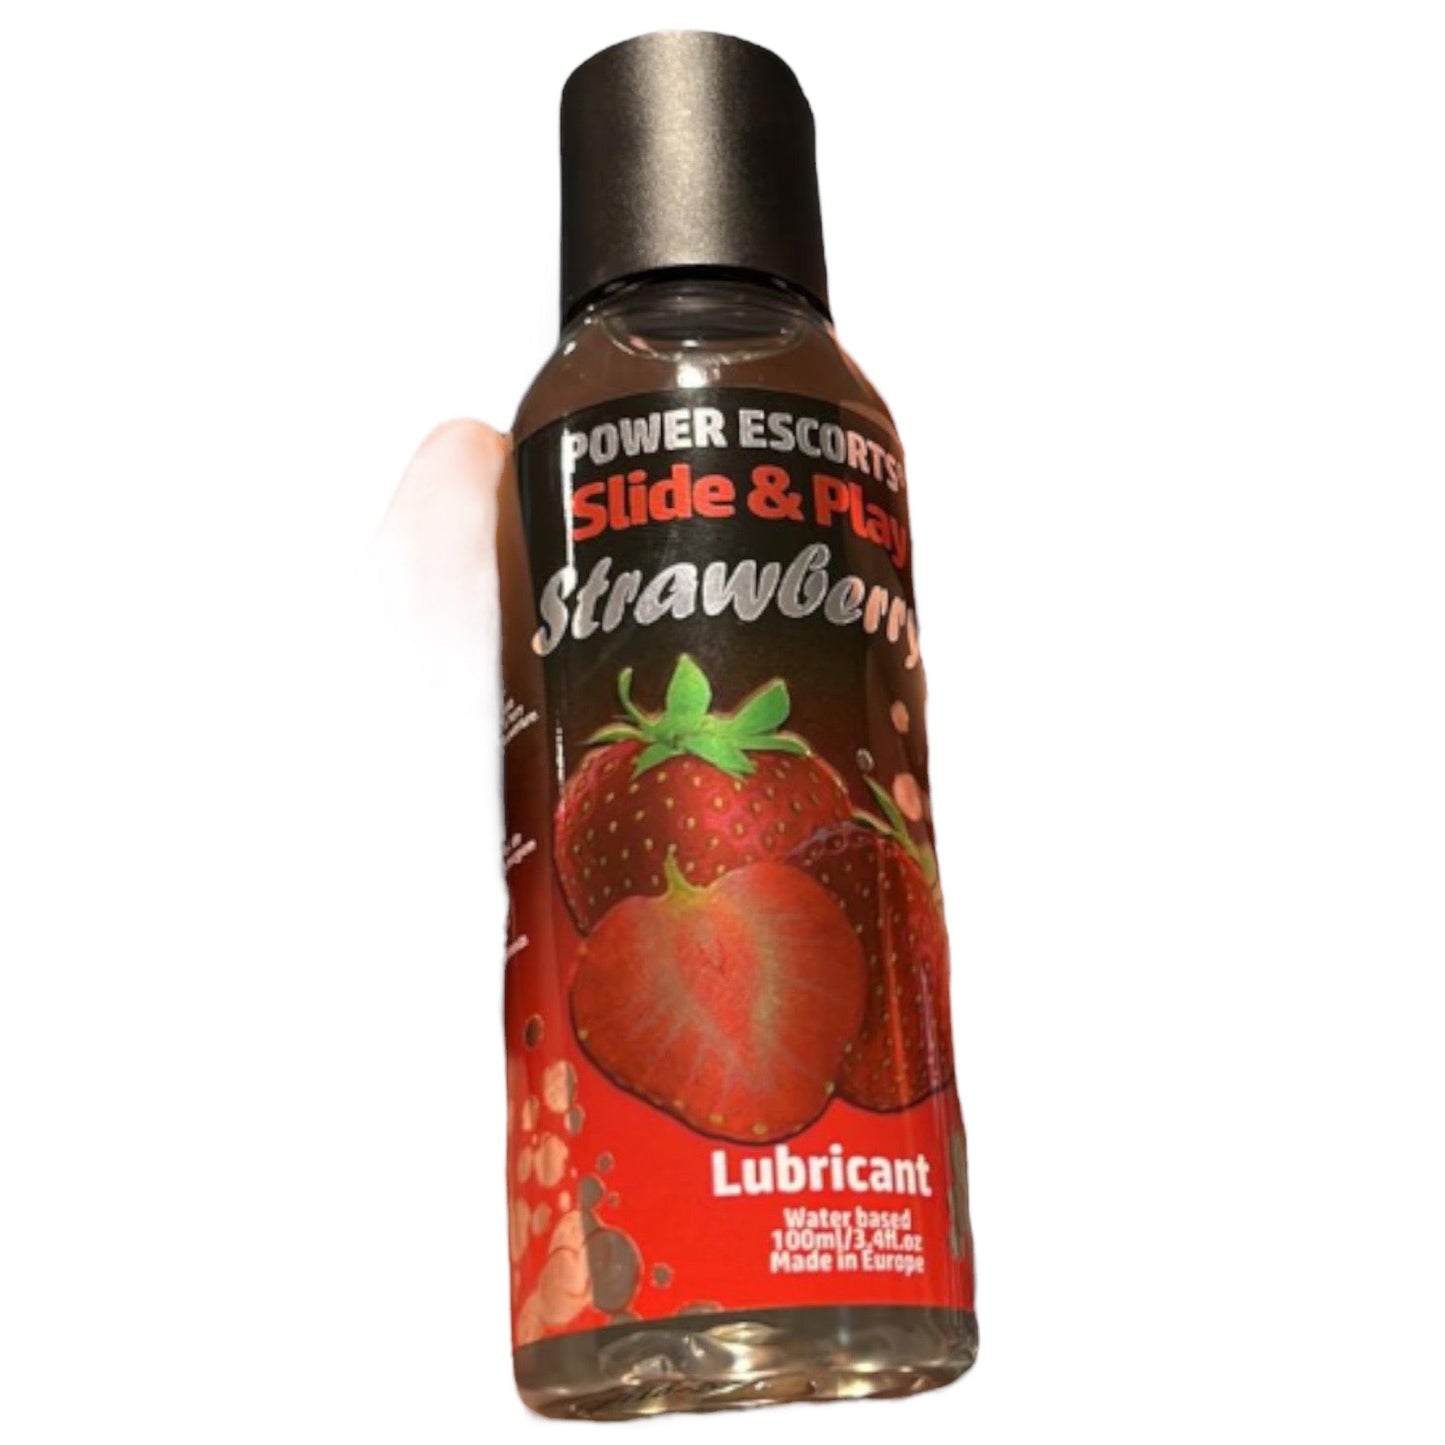 Power Escorts Strawberry Lubricant 100 ML - Slide &amp; Play - easy bottle - Brand new design - Waterbased - DR06